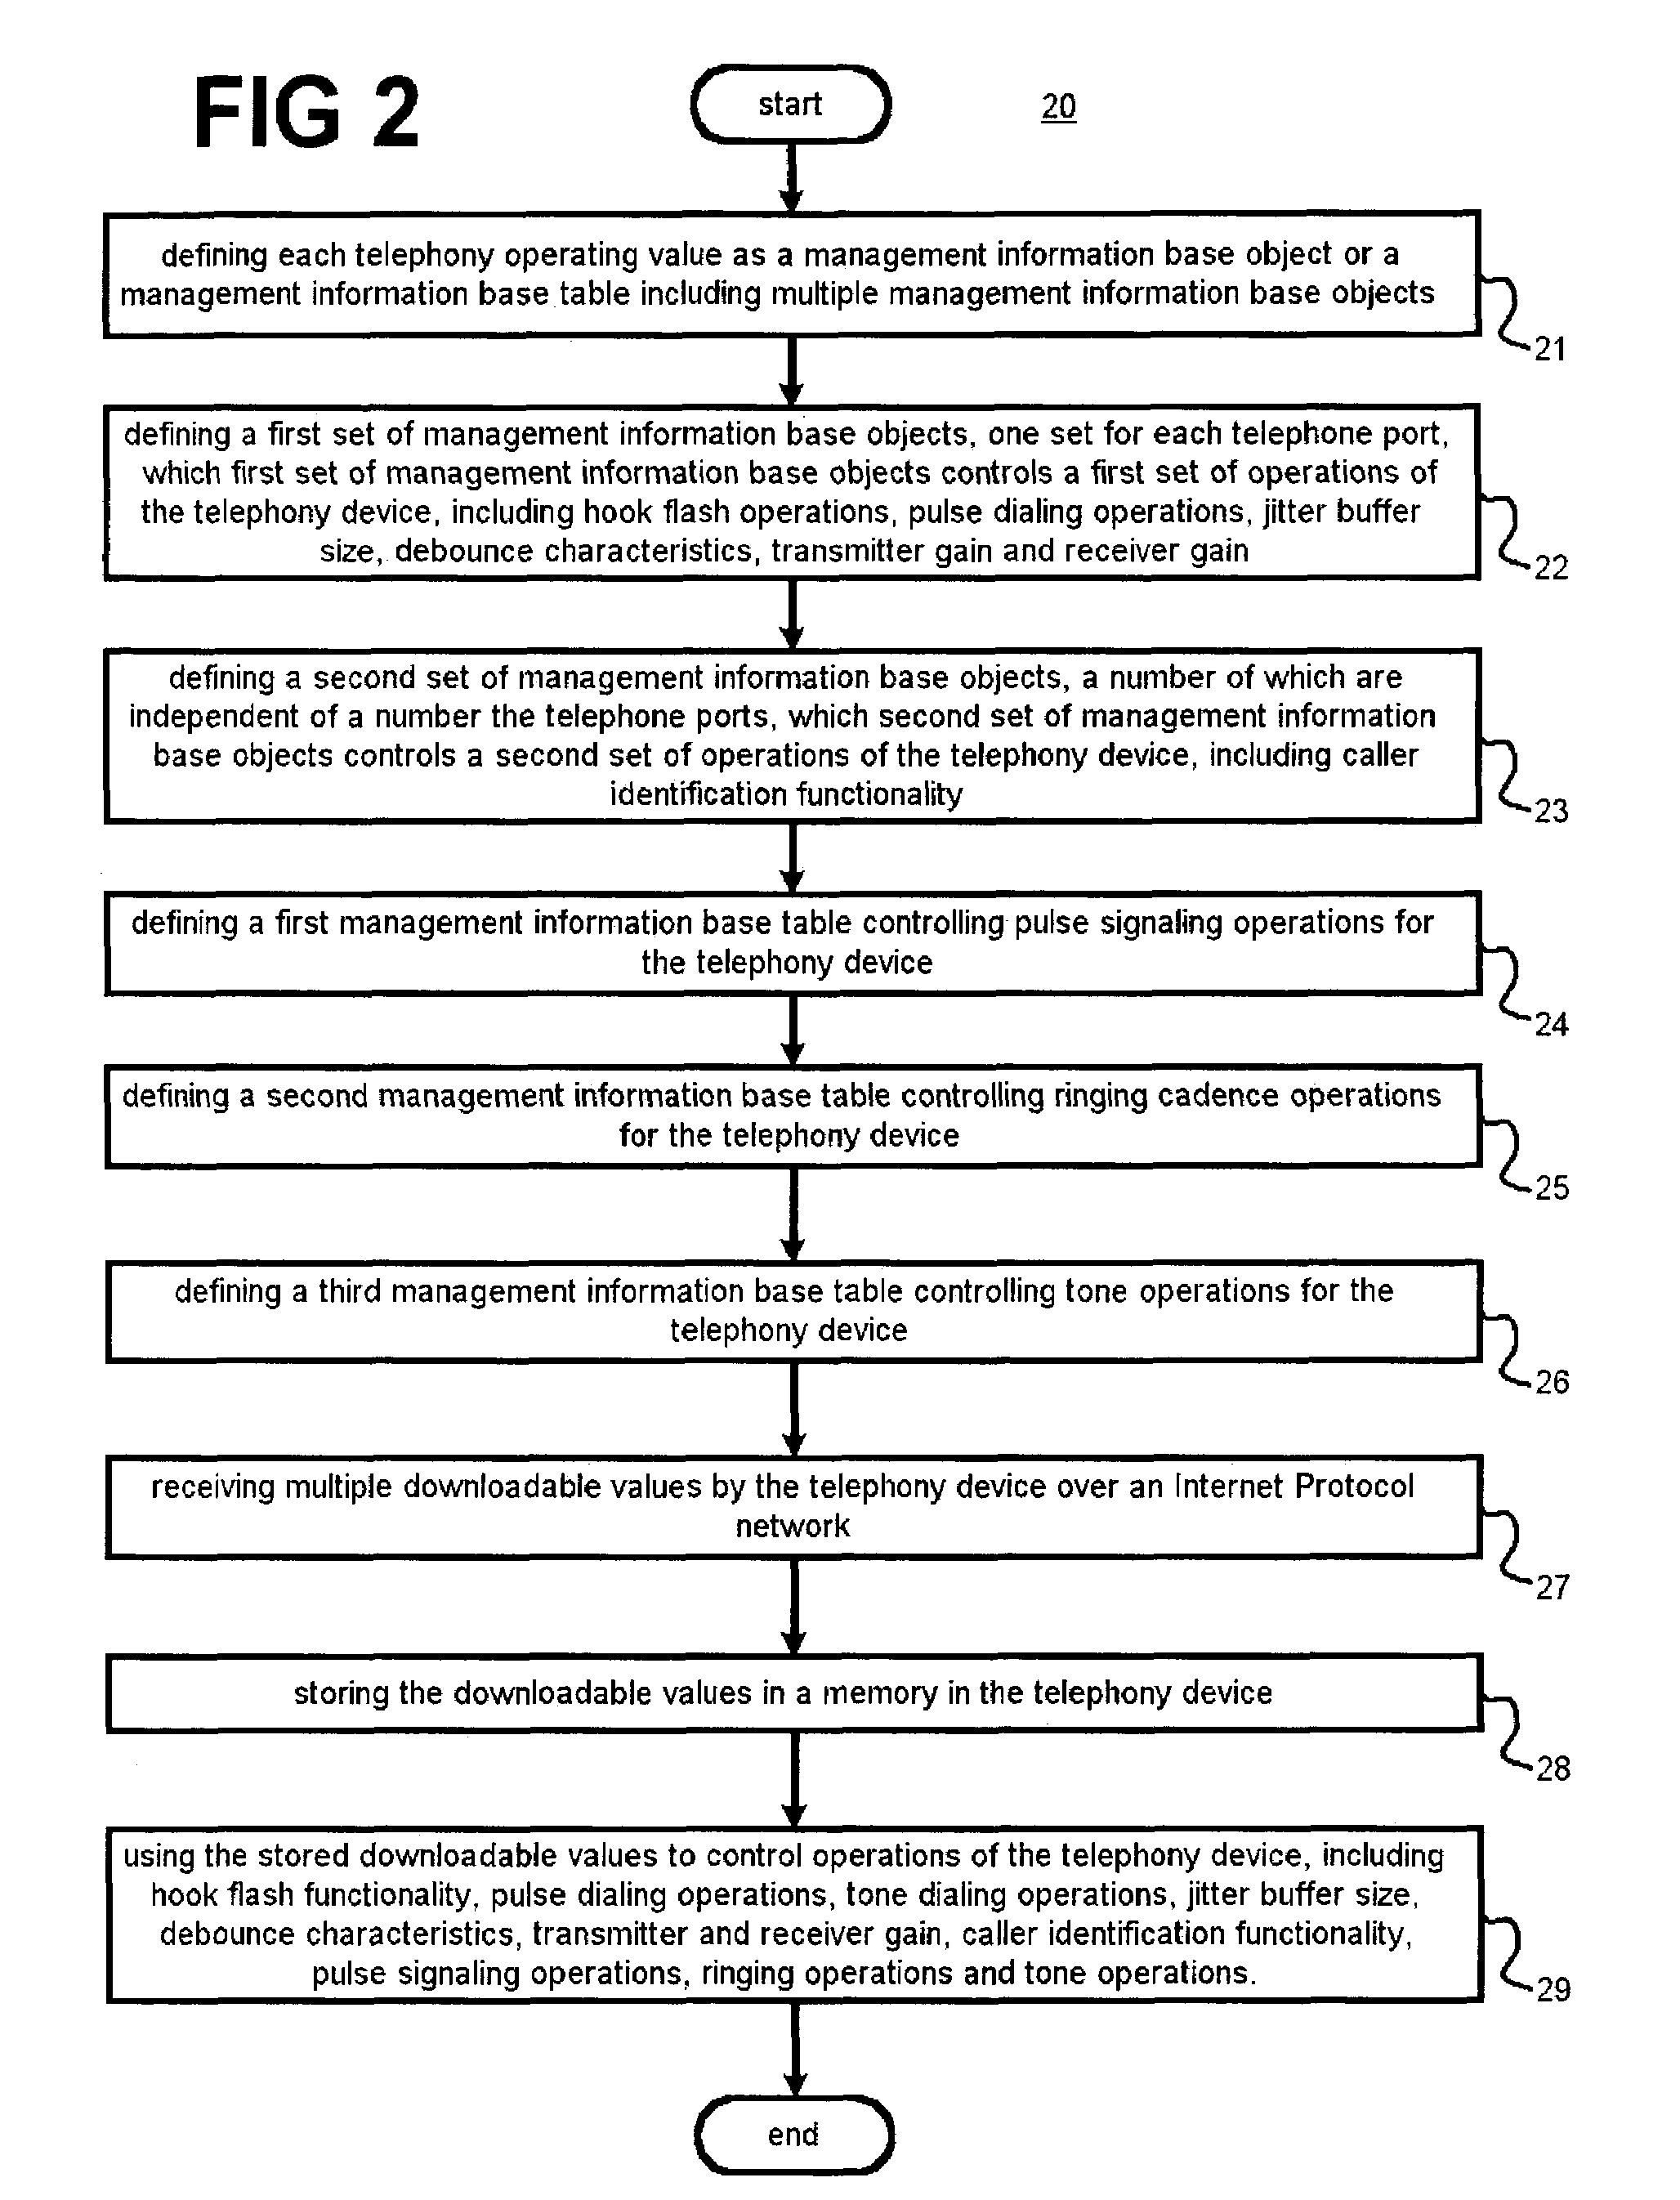 Method for generalization of telephone signaling requirements to support multiple international marketplaces in a single customer premises device